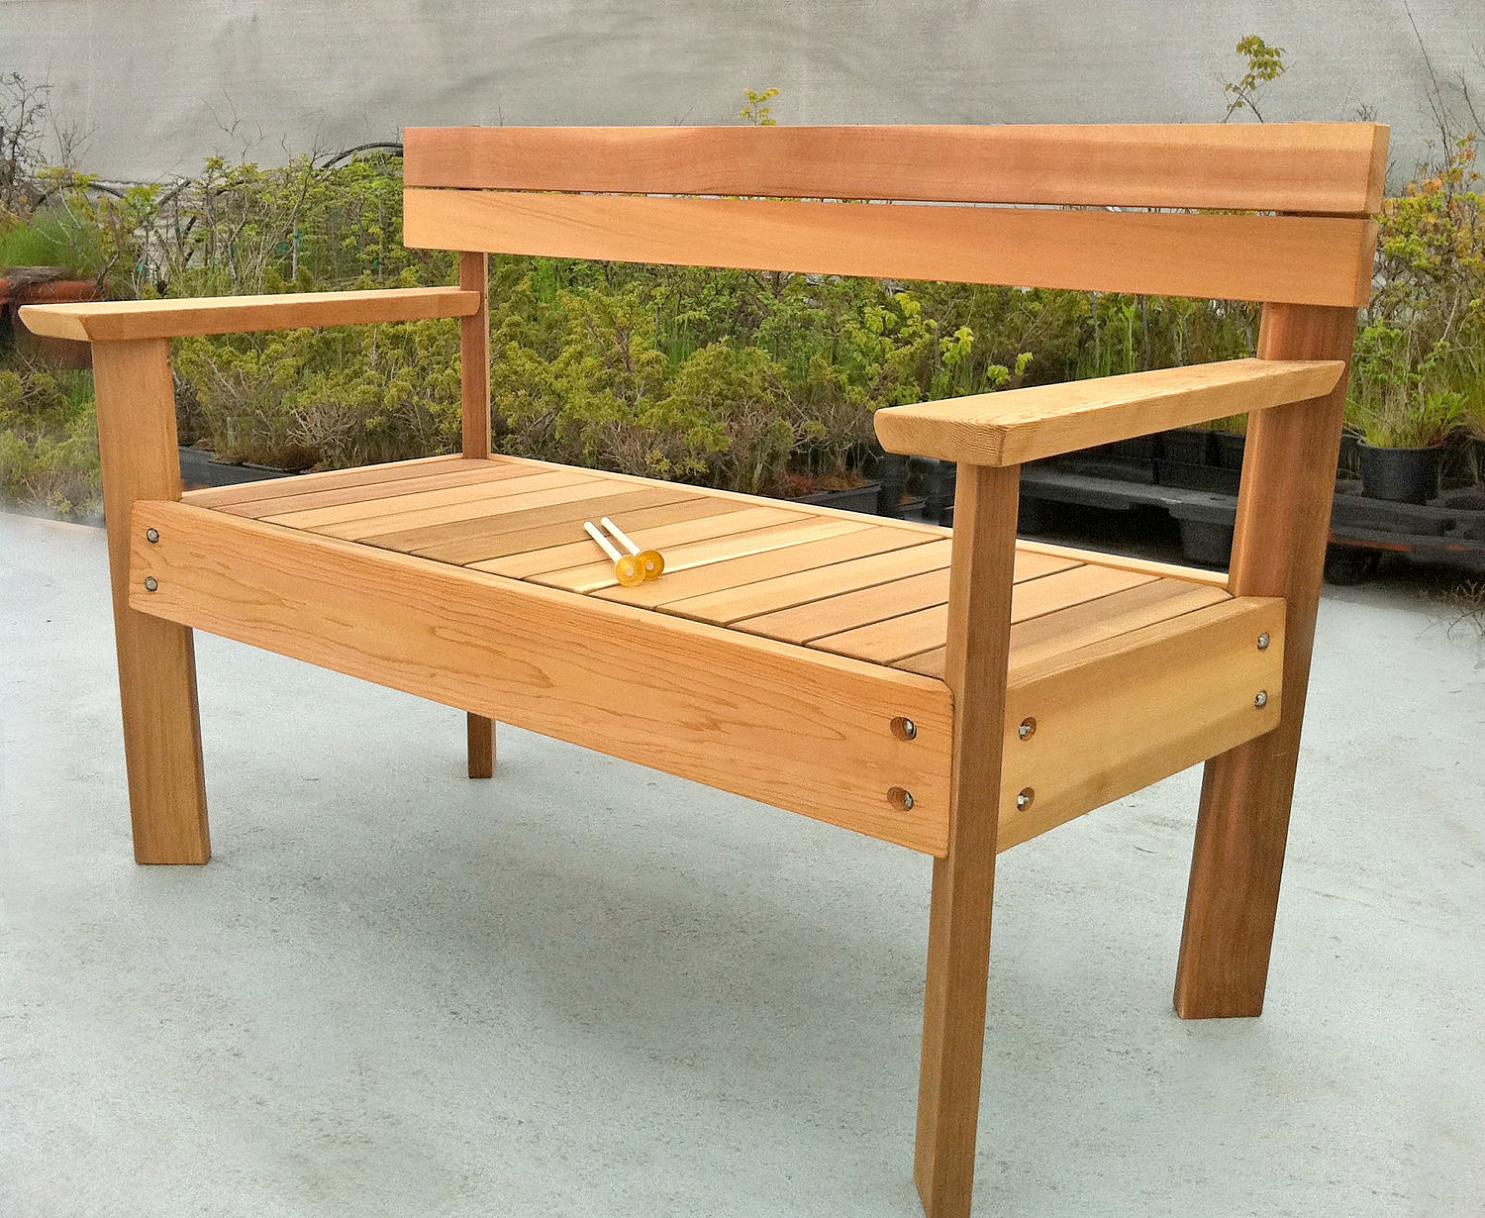 15 Creative Benches and Cool Bench Designs.